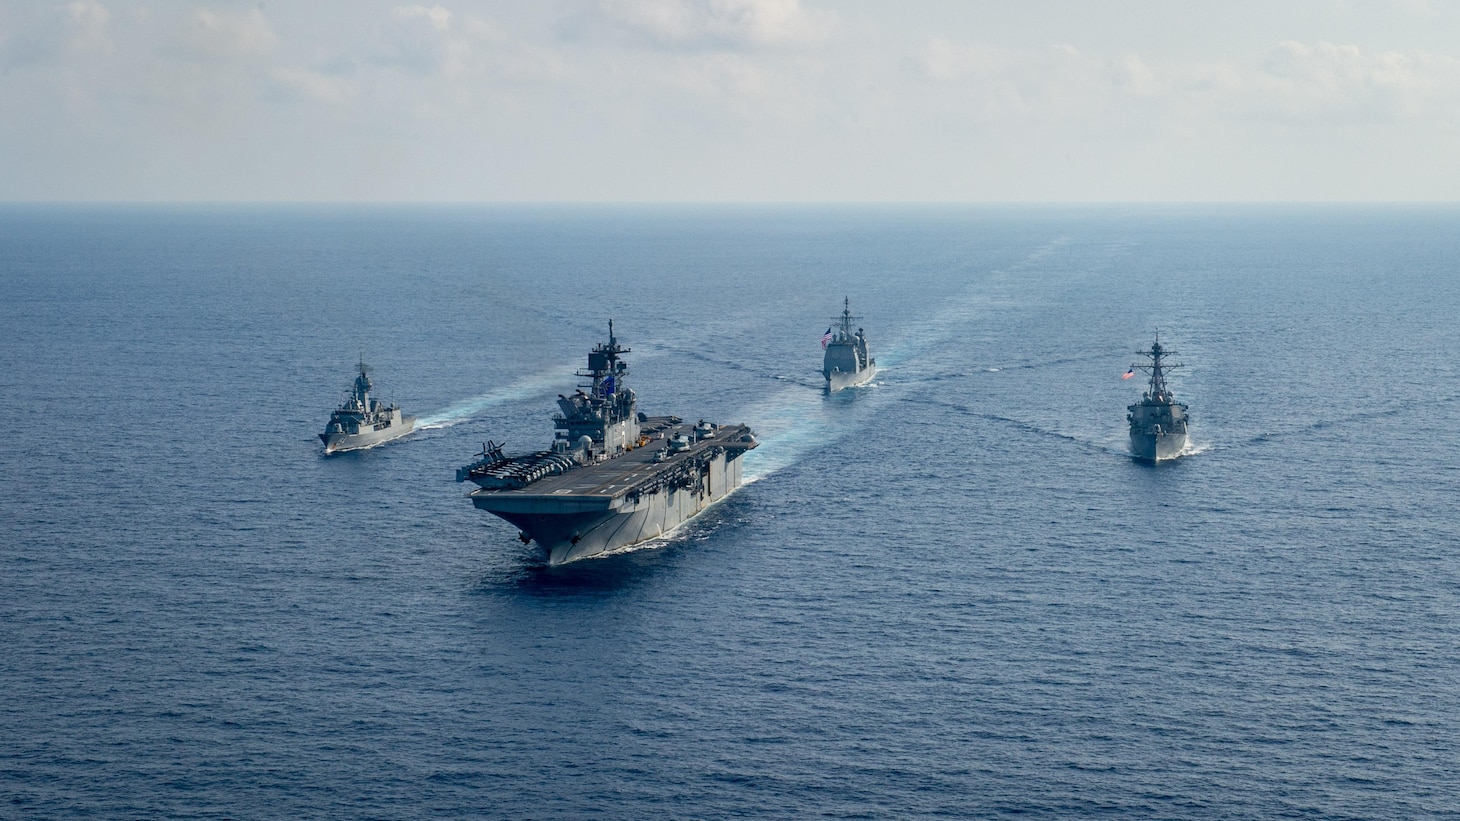 Royal Australian Navy guided-missile frigate HMAS Parramatta (FFH 154), left, sails with U.S. Navy Amphibious assault ship USS America (LHA 6), Ticonderoga-class guided-missile cruiser USS Bunker Hill (CG 52) and Arleigh-Burke class guided missile destroyer USS Barry (DDG 52). Bunker Hill is deployed to the U.S. 7th Fleet area of operations and is operating with the America Expeditionary Strike Group in support of security and stability in the Indo-Pacific region. (U.S. Navy photo by Petty Officer 3rd Class Nicholas Huynh)